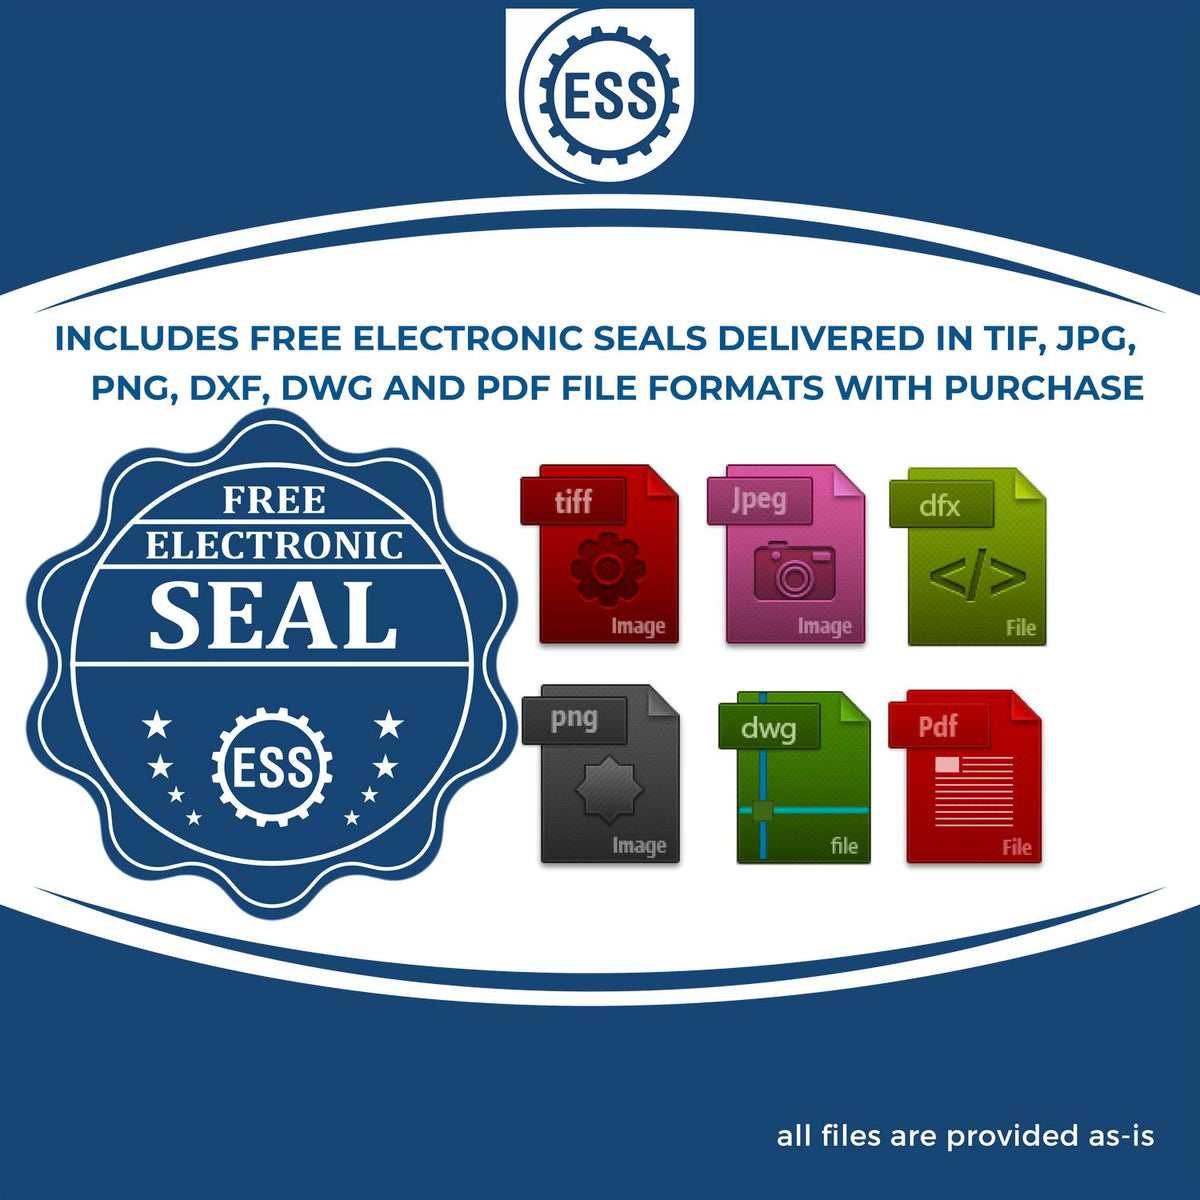 An infographic for the free electronic seal for the PSI Arkansas Notary Stamp illustrating the different file type icons such as DXF, DWG, TIF, JPG and PNG.